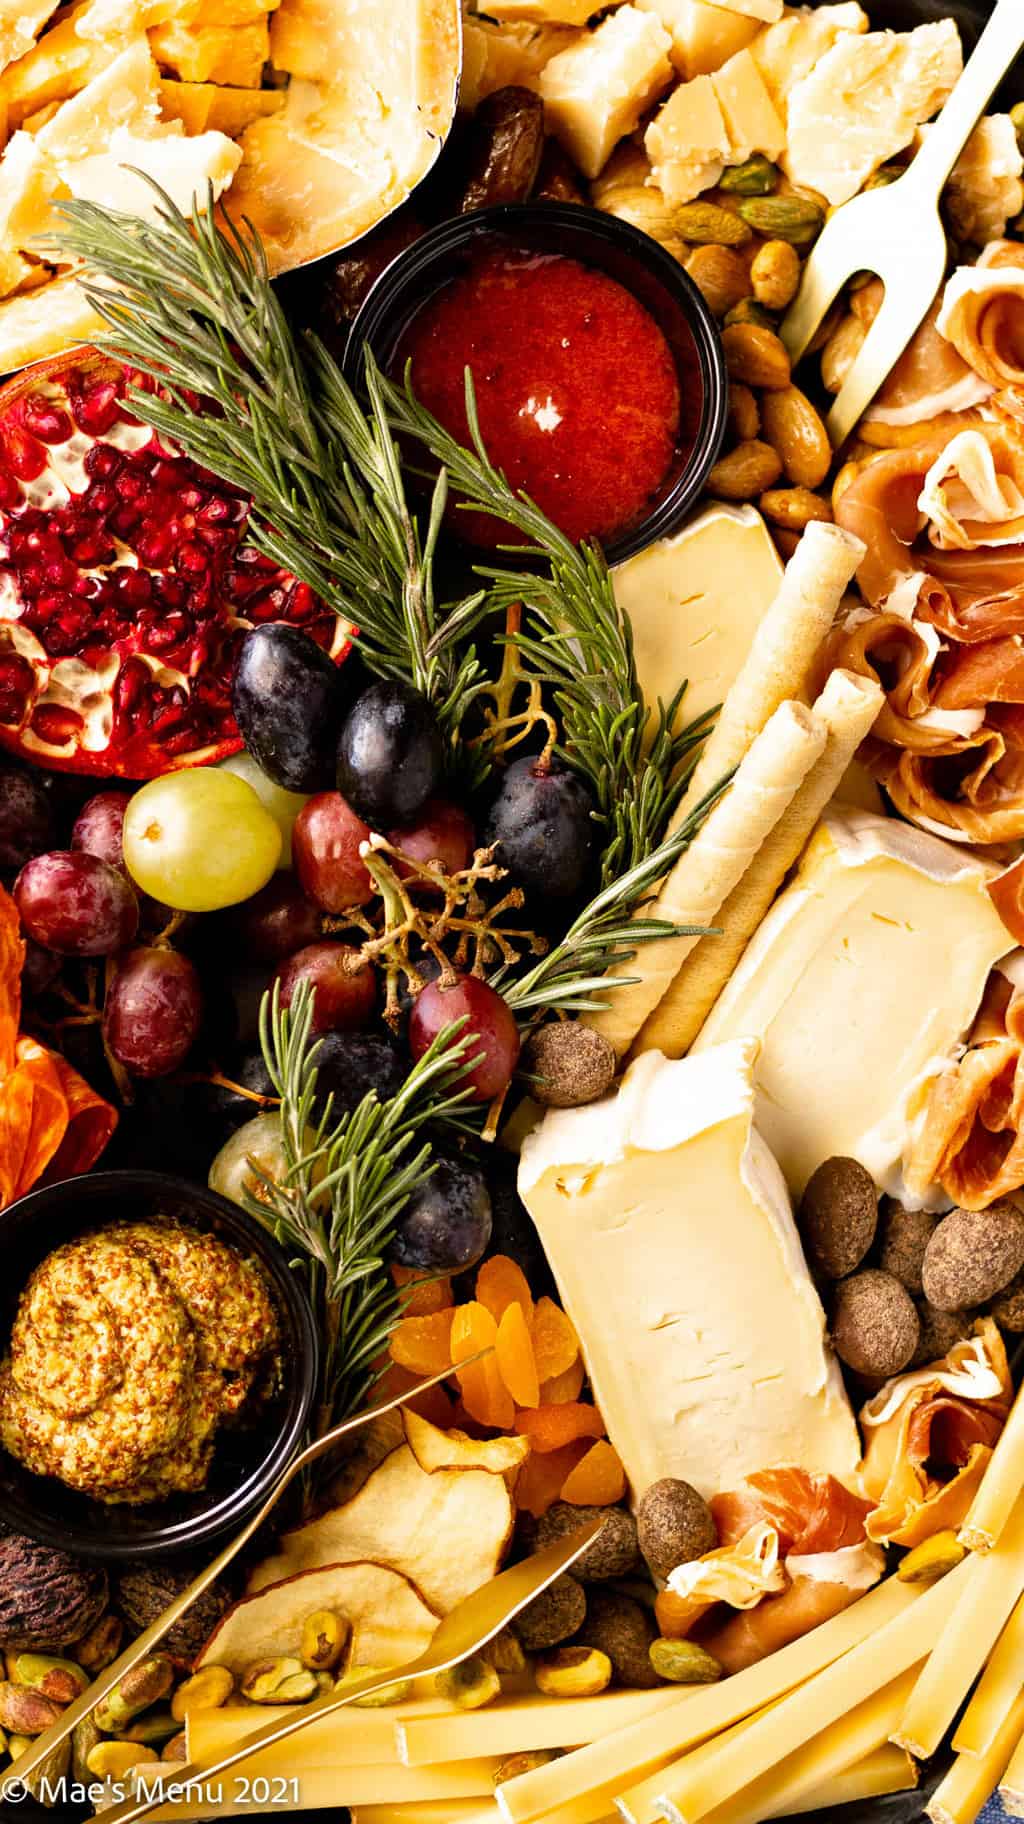 An overhead shot of a charcuterie board with herbs, dried fruit, and nuts.